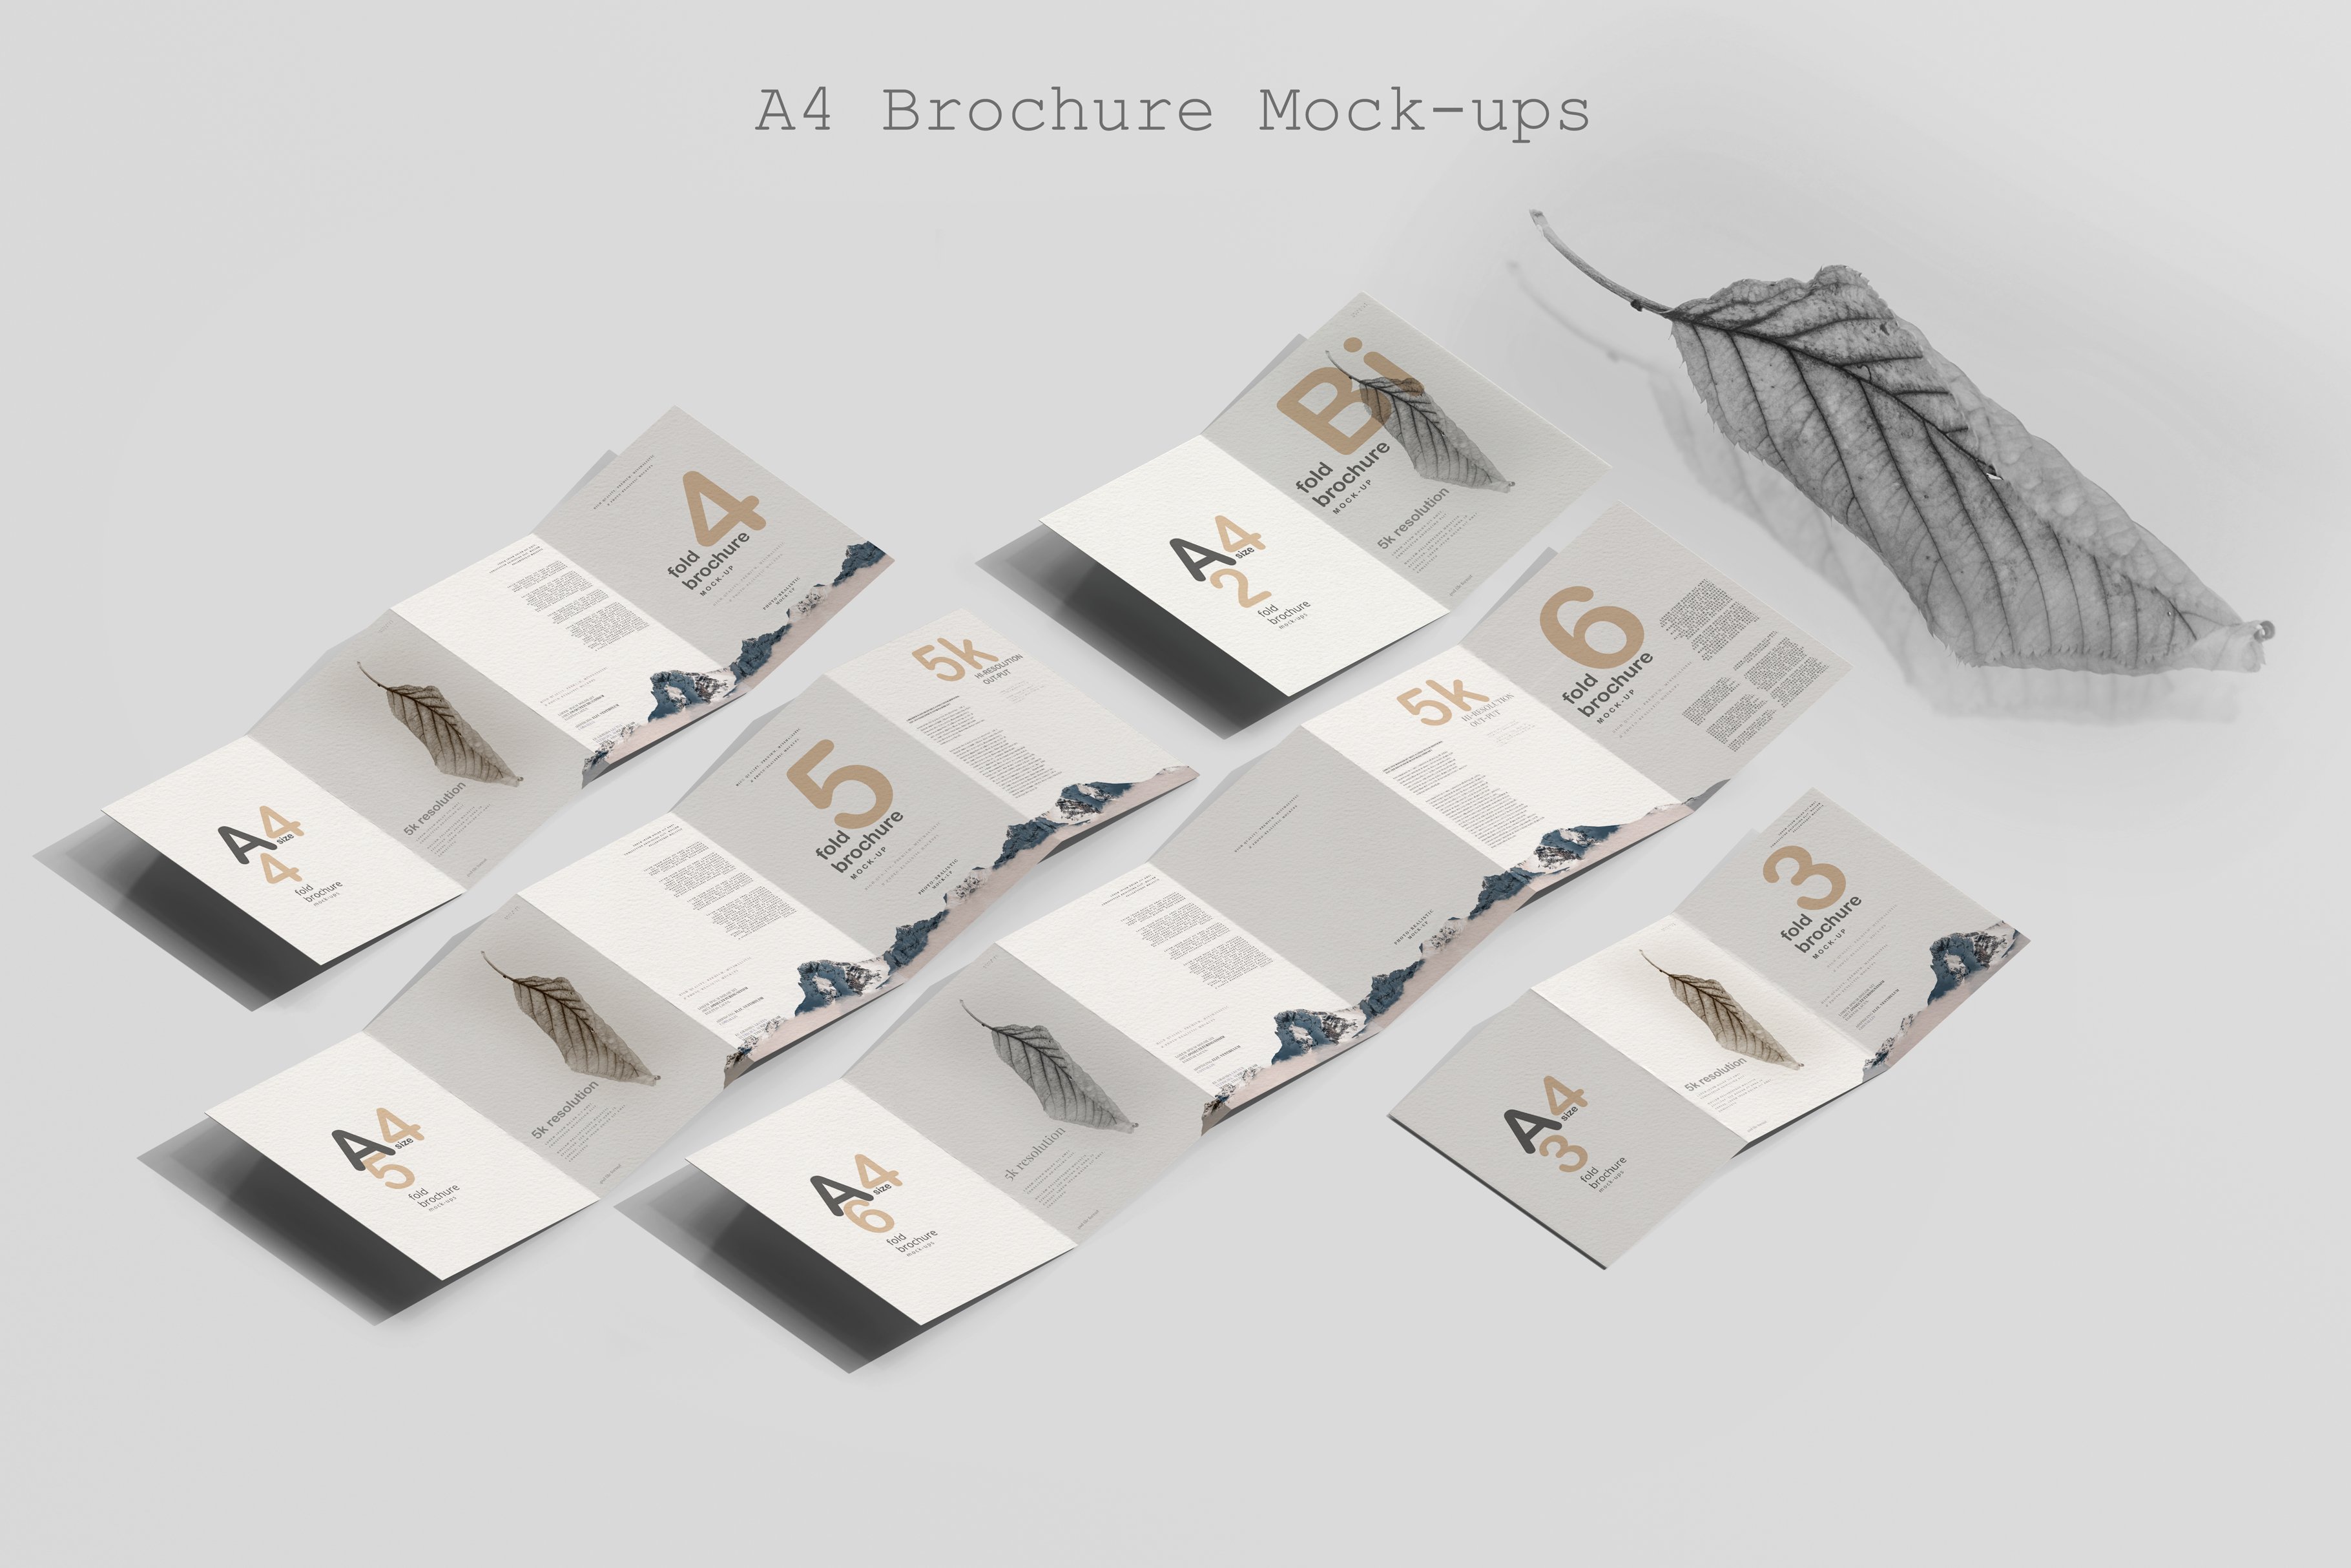 A4 Brochure Mockup Collection cover image.